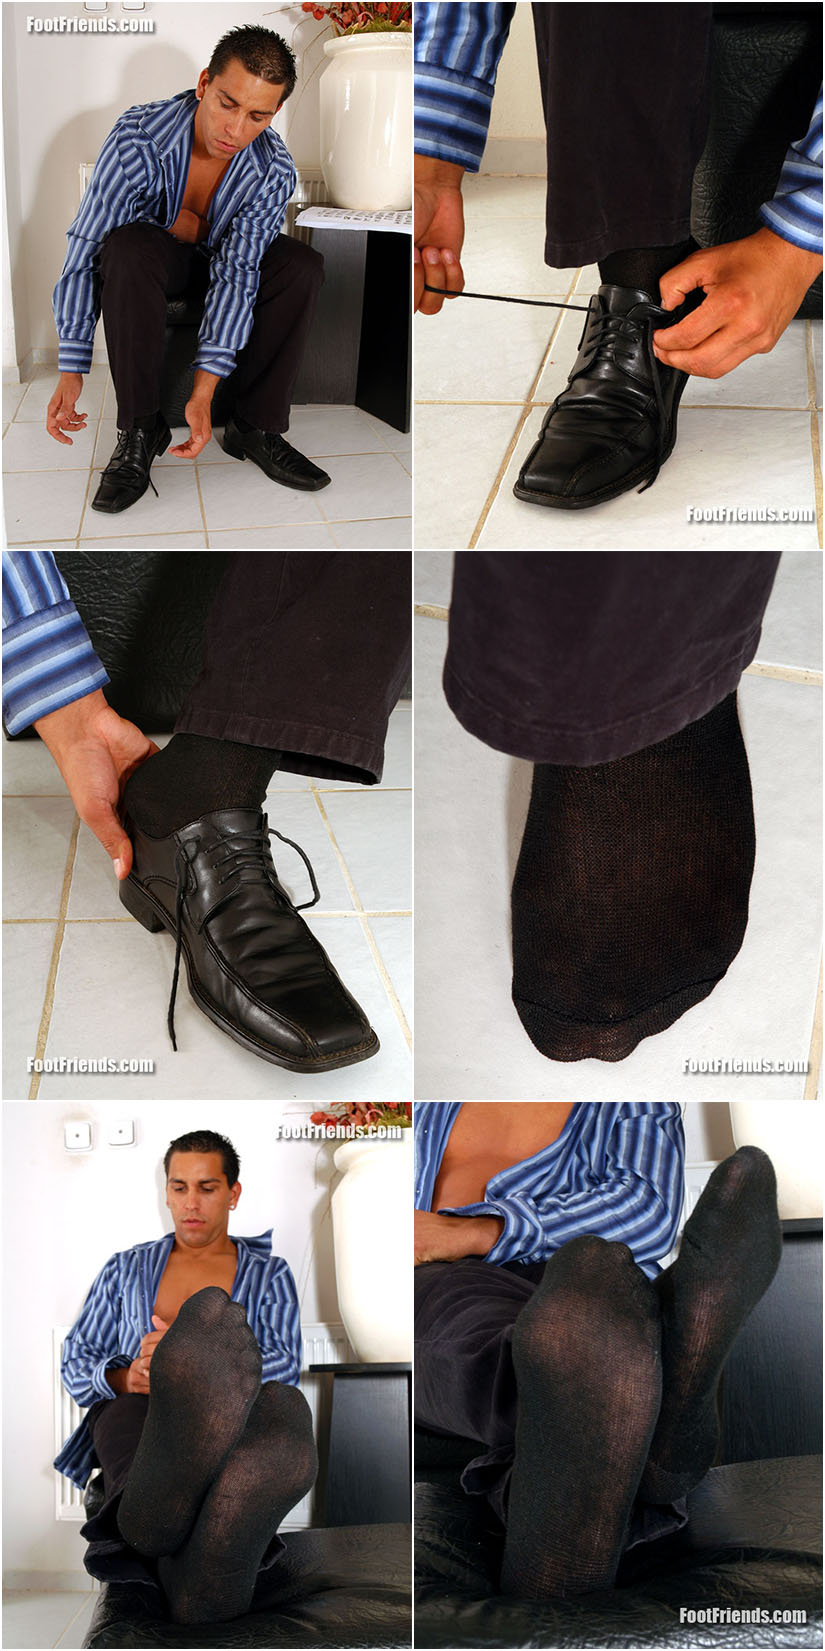 Amateur guy takes off his dress shoes, shows sheer black socks